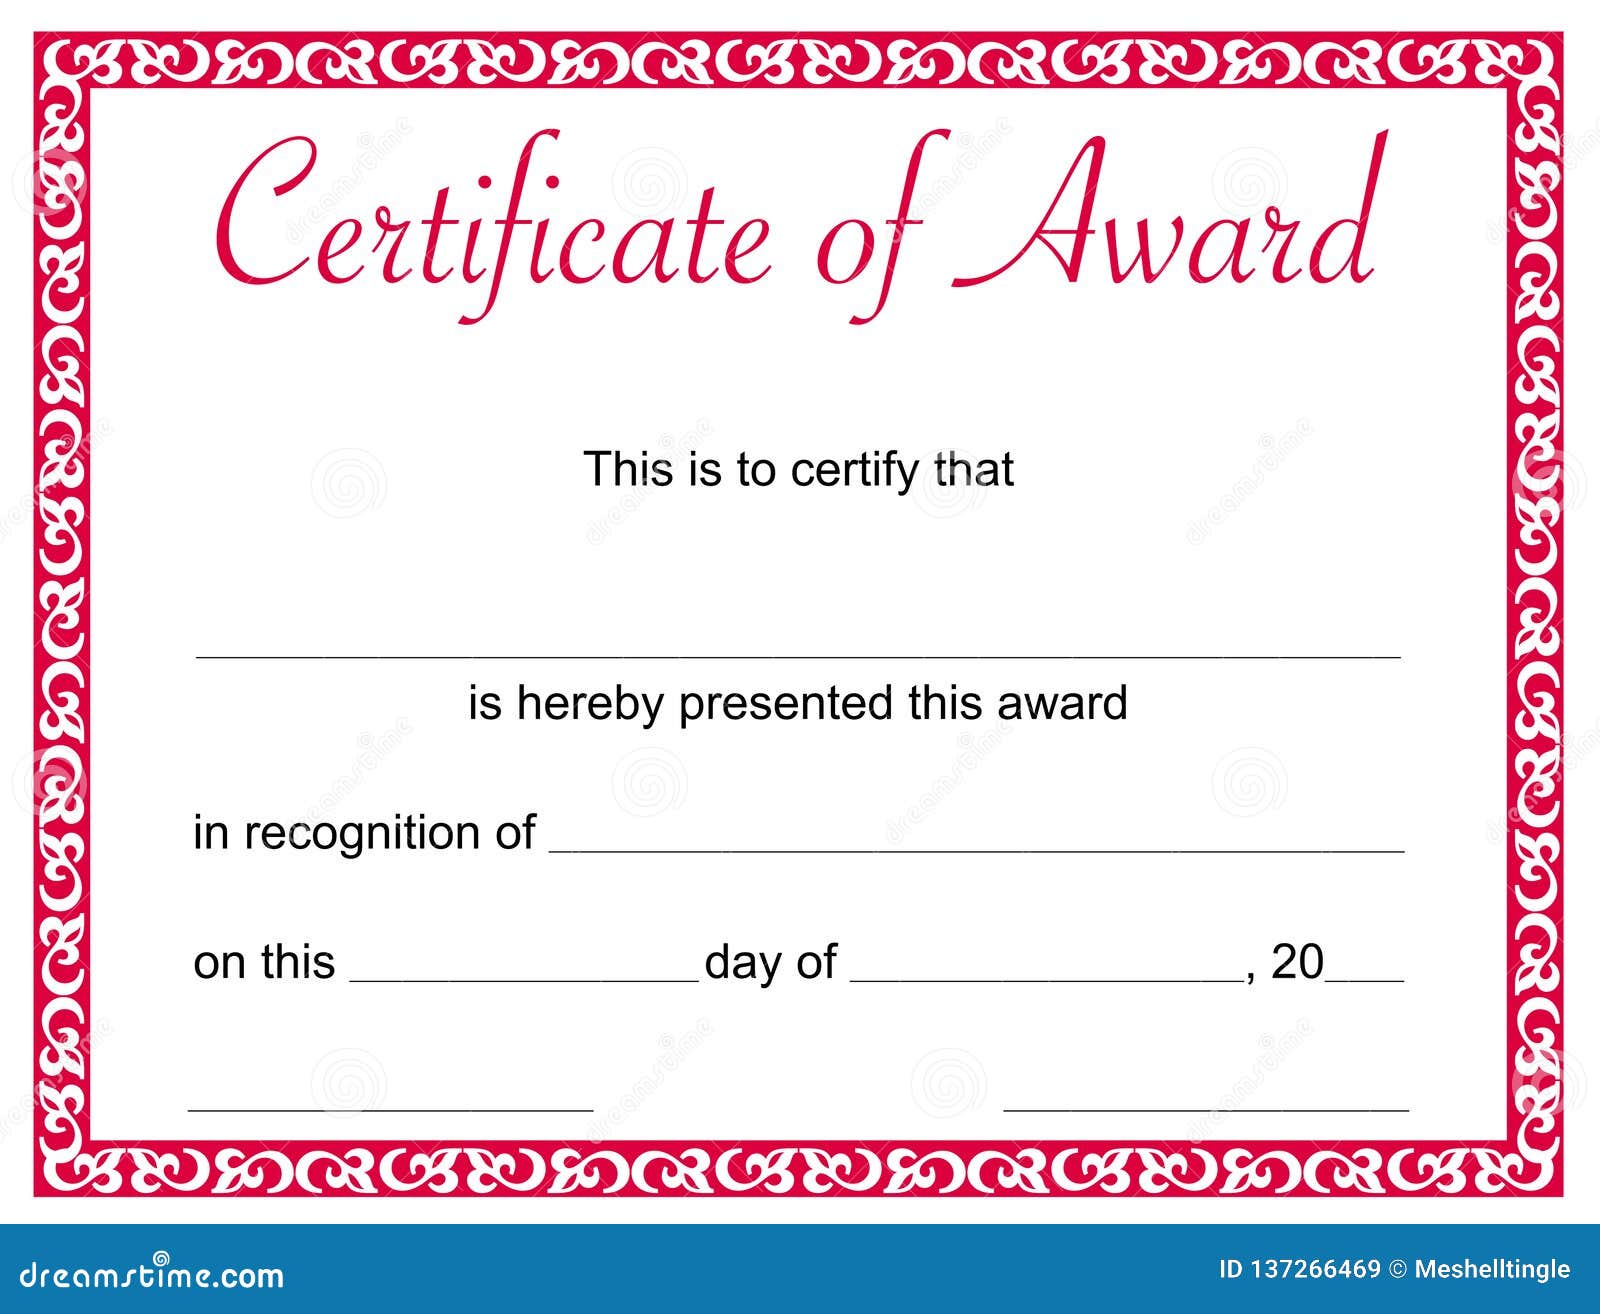 Certificate Of Award Template from thumbs.dreamstime.com